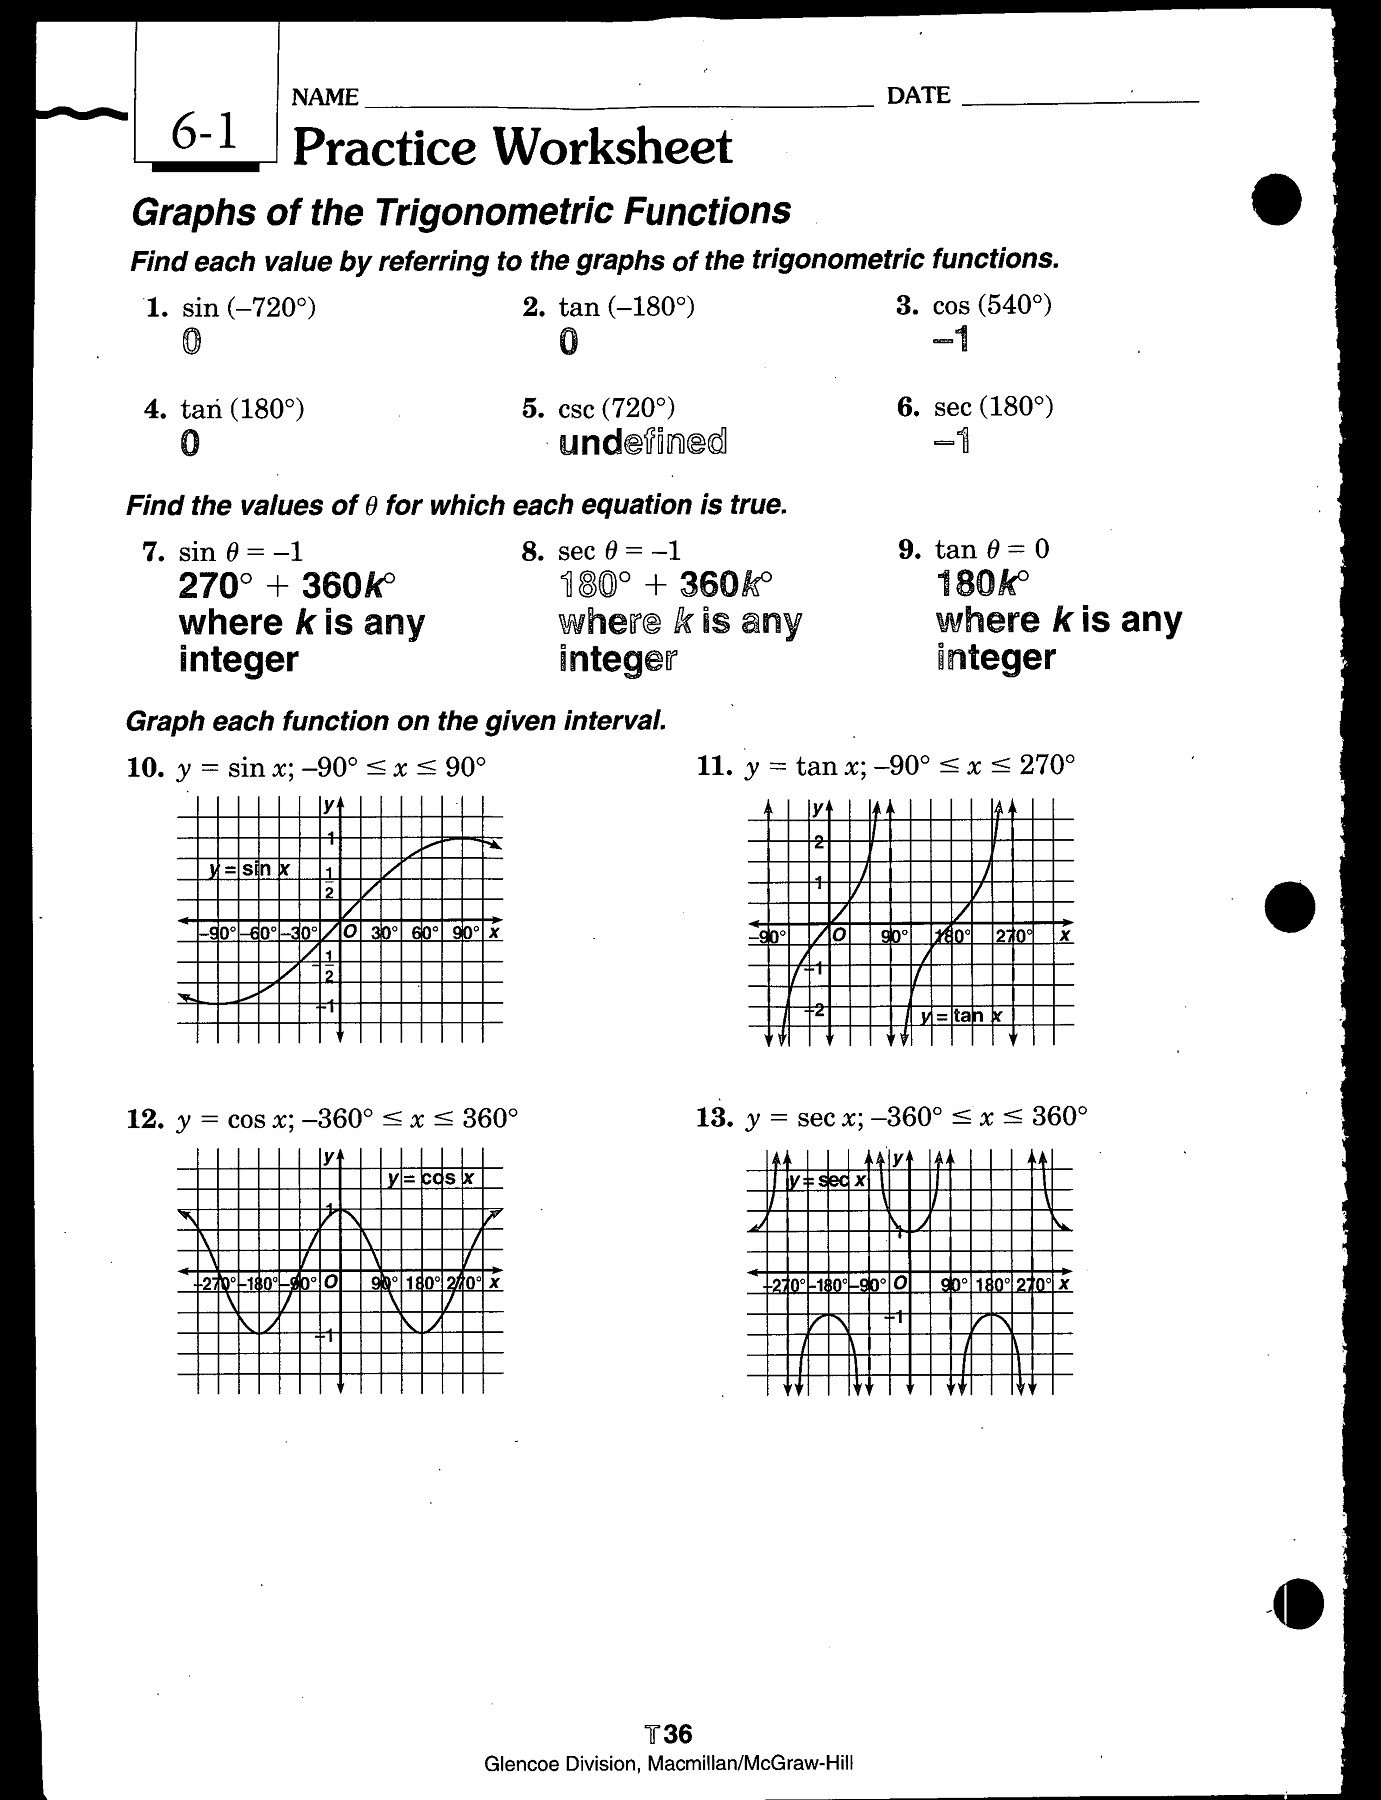 inverse-trig-functions-worksheet-pdf-and-answer-key-29-scaffolded-questions-on-simplifying